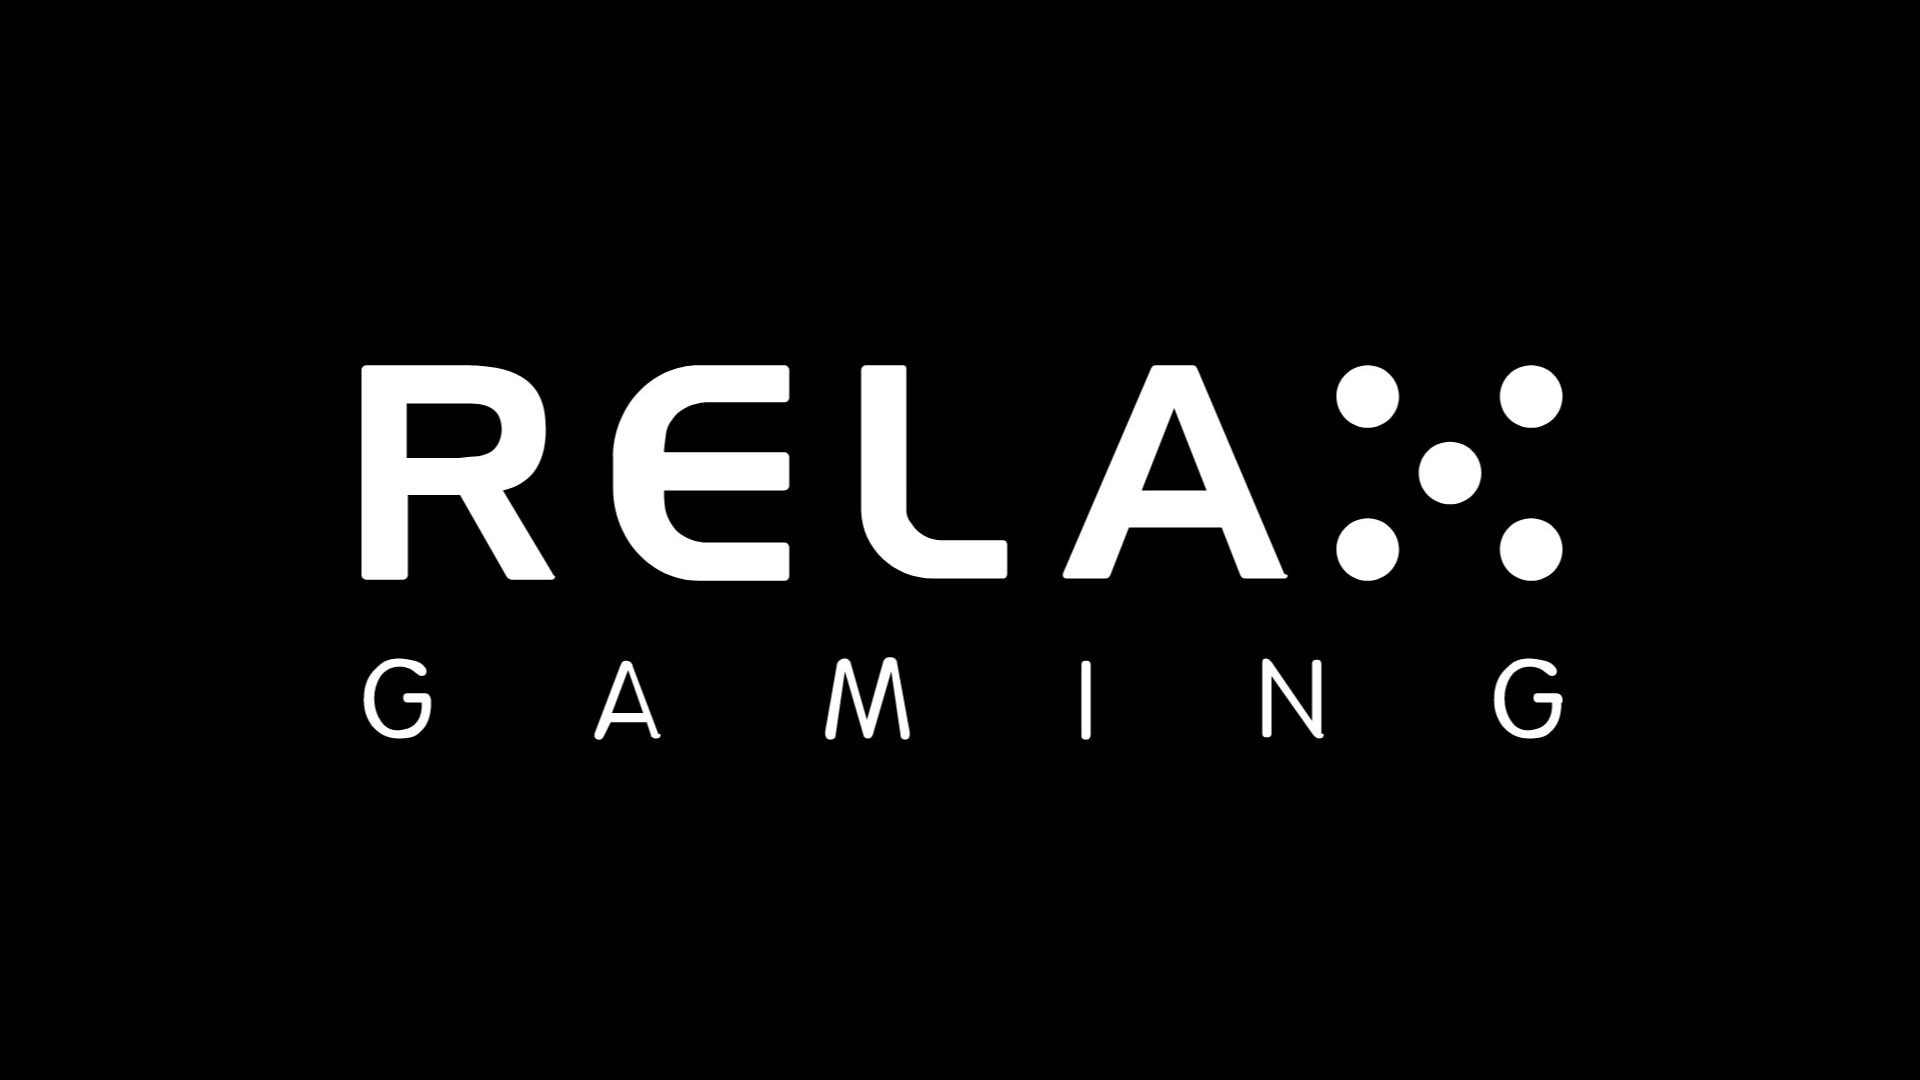 Lady Luck Games signs landmark aggregation agreement with Relax Gaming